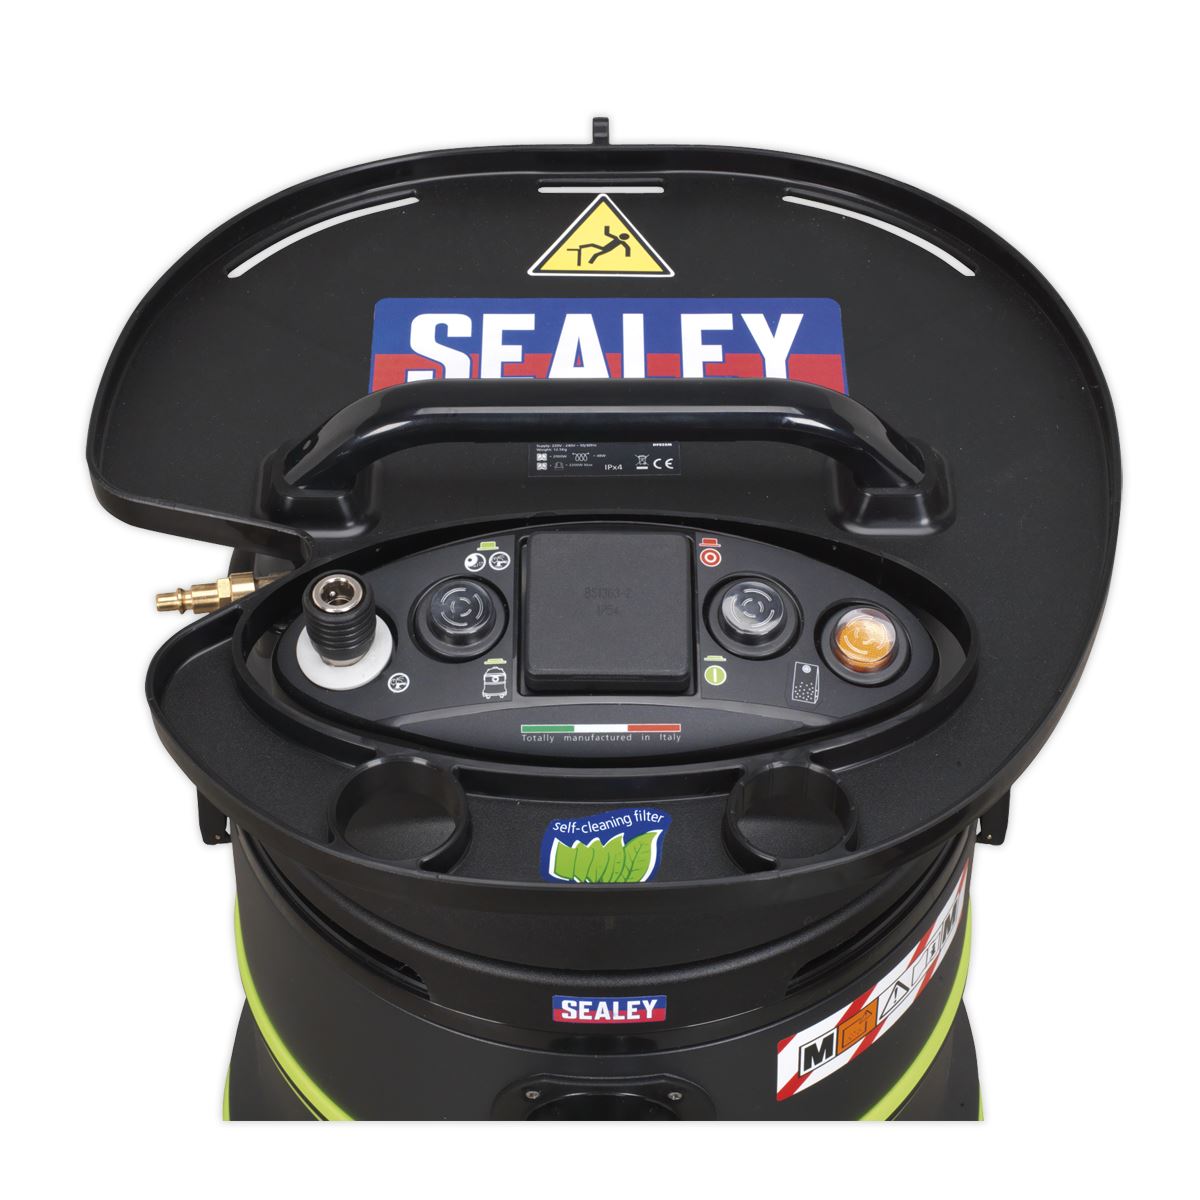 Sealey Vacuum Cleaner Industrial Dust-Free Wet/Dry 35L 1000W/230V Plastic Drum M-Class Self-Clean Filter